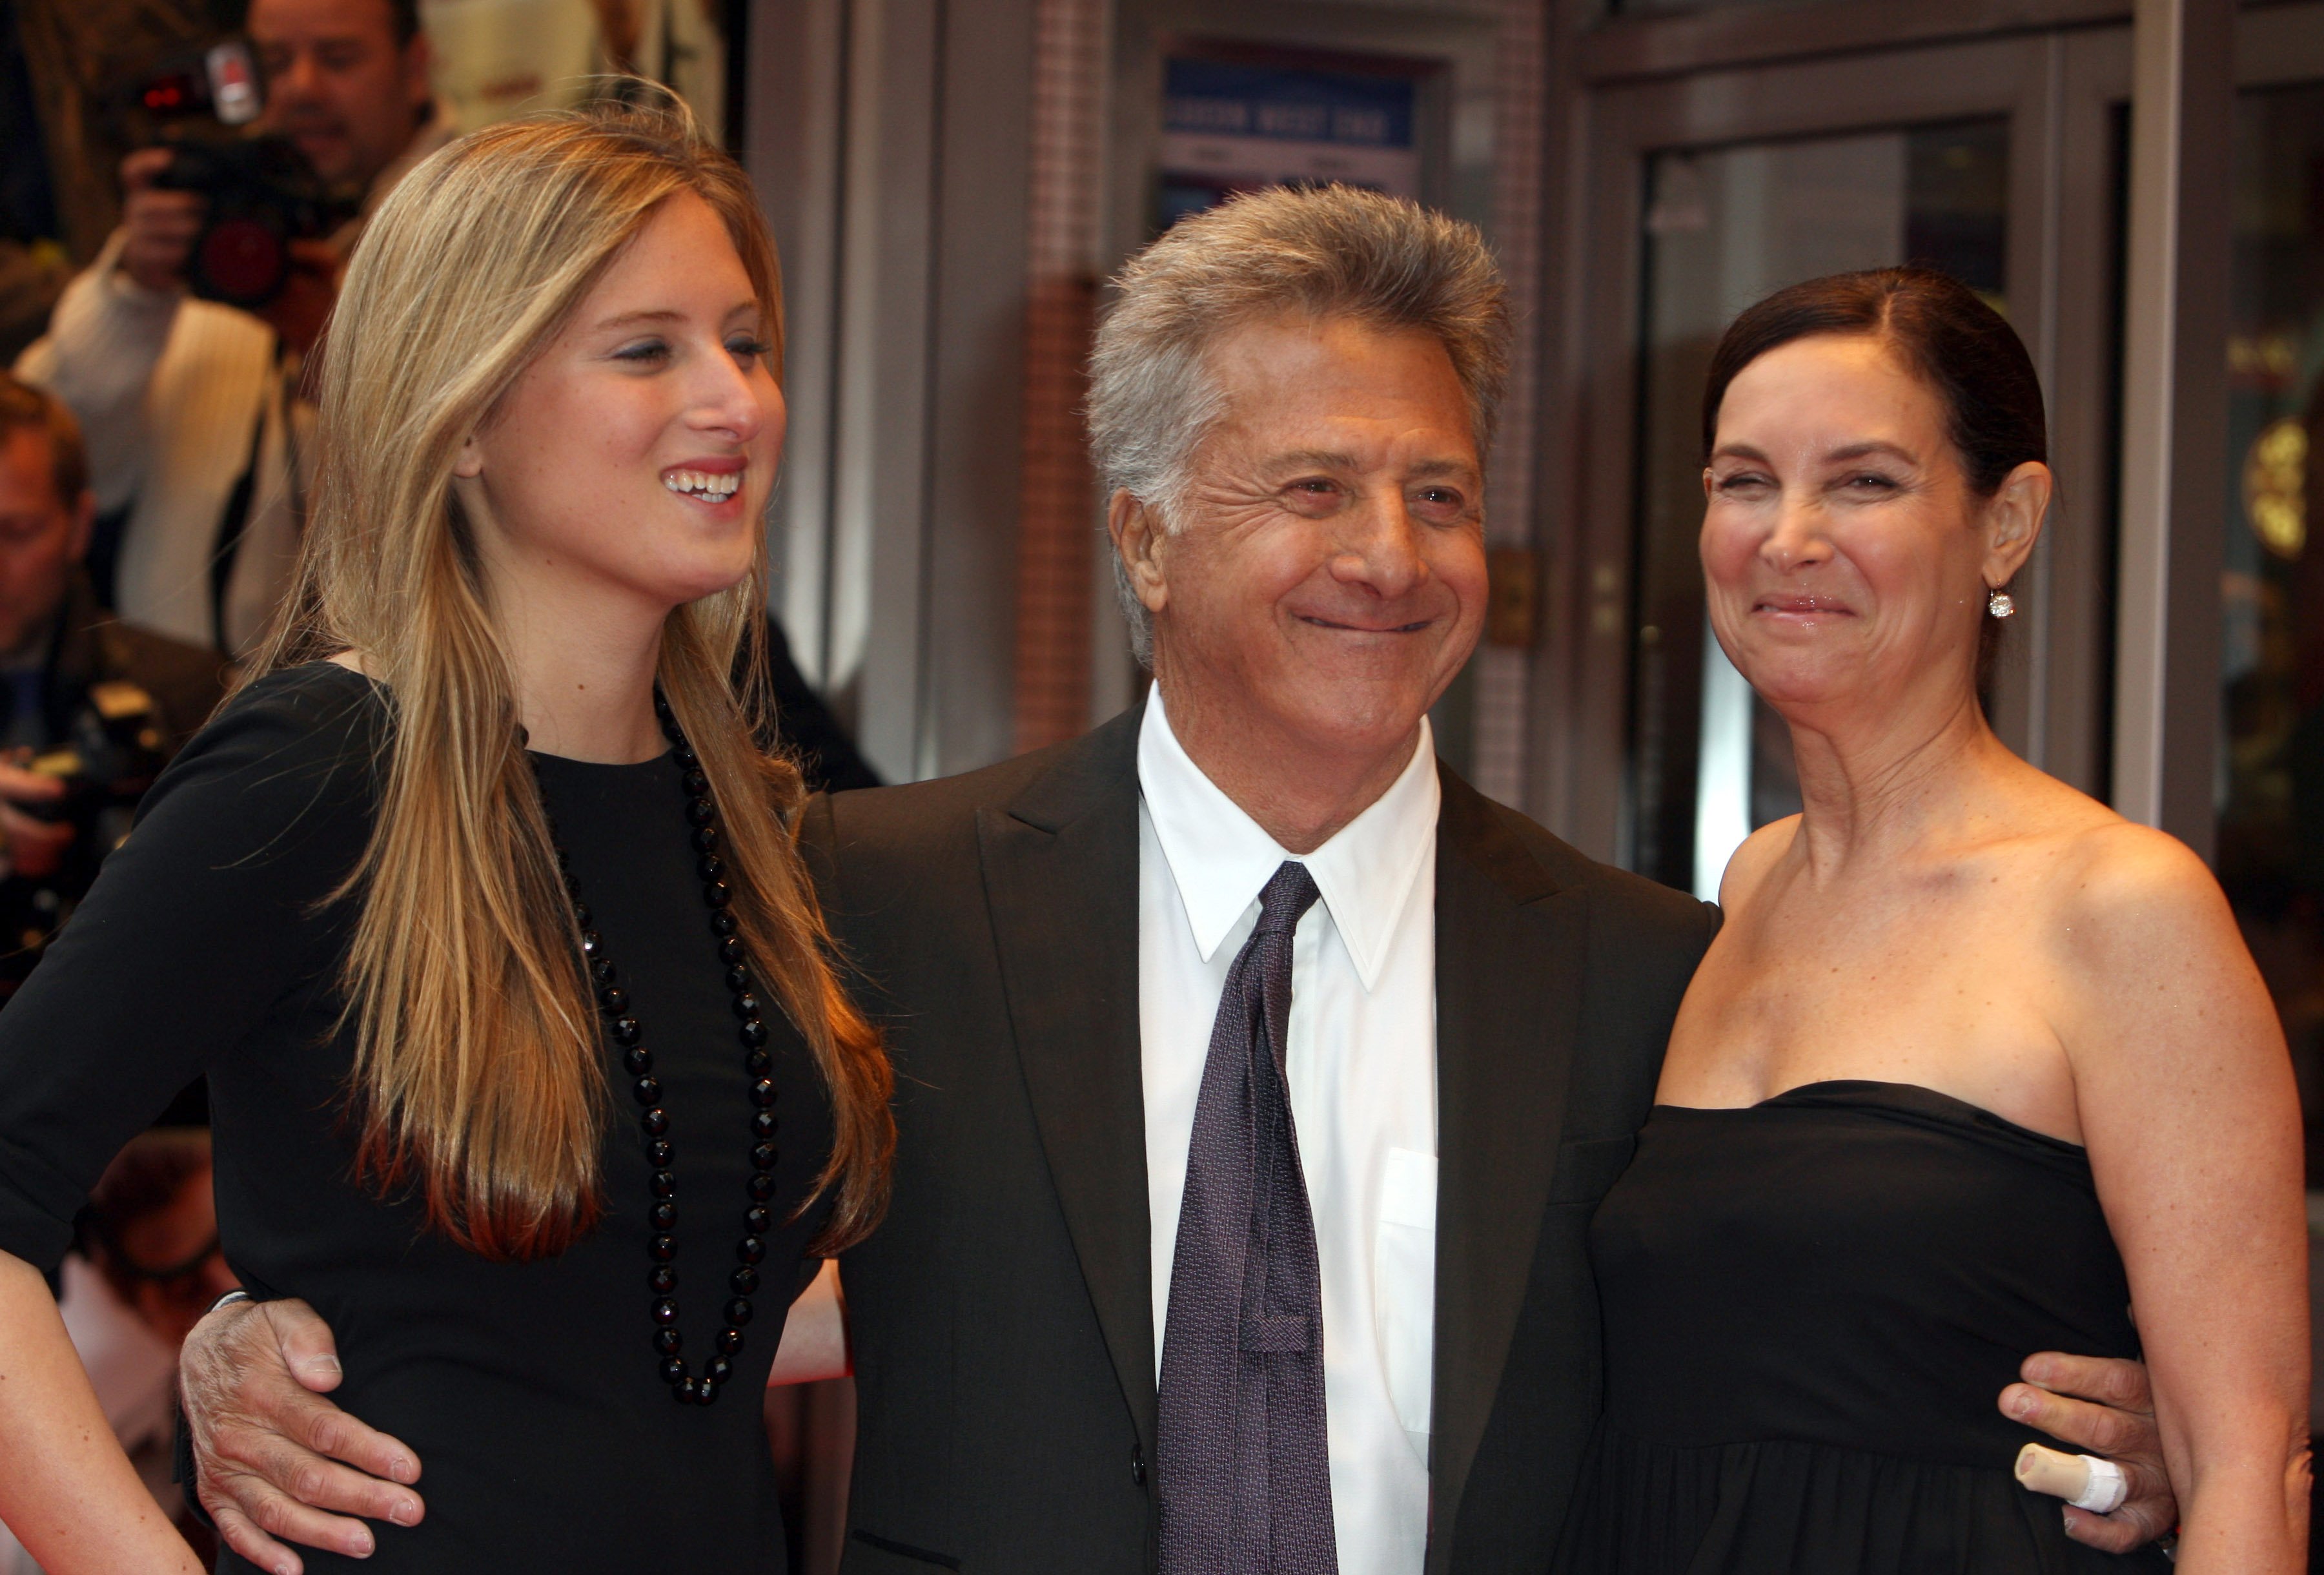 Dustin Hoffman and his wife Lisa Gottsegen and daughter Karina arrive at The Gala Premiere of Last Chance Harvey at The Odeon West End in London | Photo: Getty Images